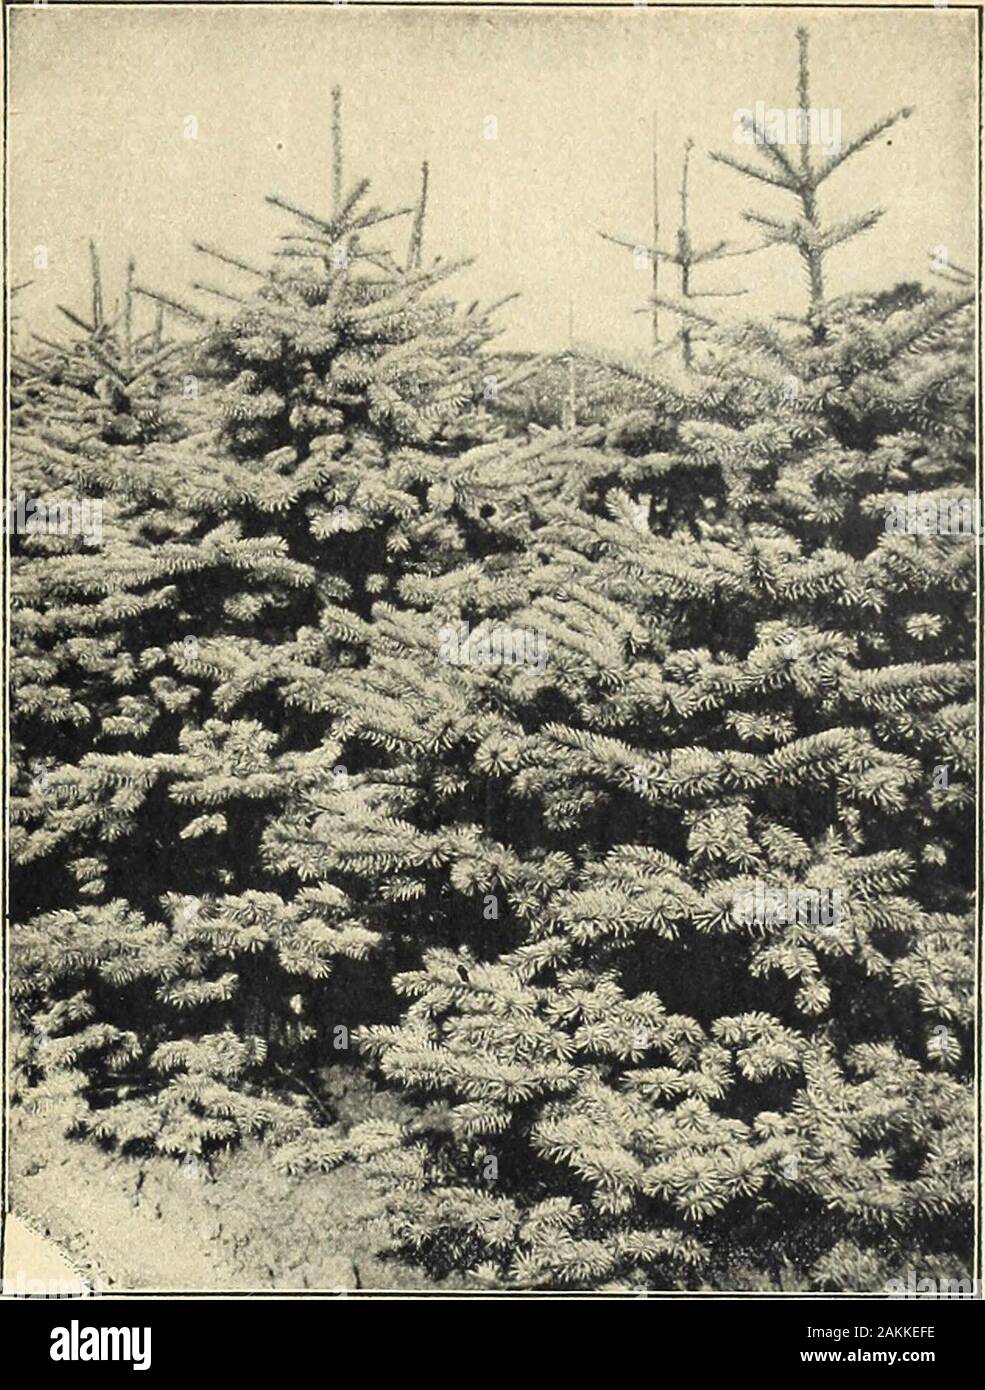 Farquhar's garden annual : 1918 . * Picea pungens glauca Kosteriana. Blue Spruce. PINUS densiflora. (Japanese Red Pine.) A rapid-growing and very ornamental Pine; thelong slender needles are bright bluish-green. 3 to 4 ft., $3.00 each. mughus. (Dwarf Mountain Pine.) An Alpine species extremely valuable for exposed situa-tions; of dwarf, spreading habit, seldom over 4 feet in height. The foliage is of strong, deepgreen color and the branching growth of this beautiful bushy Pine makes it exceedinglydesirable for lawn clumps, evergreen borders and terraces. It is one of the best Ever-greens for p Stock Photo